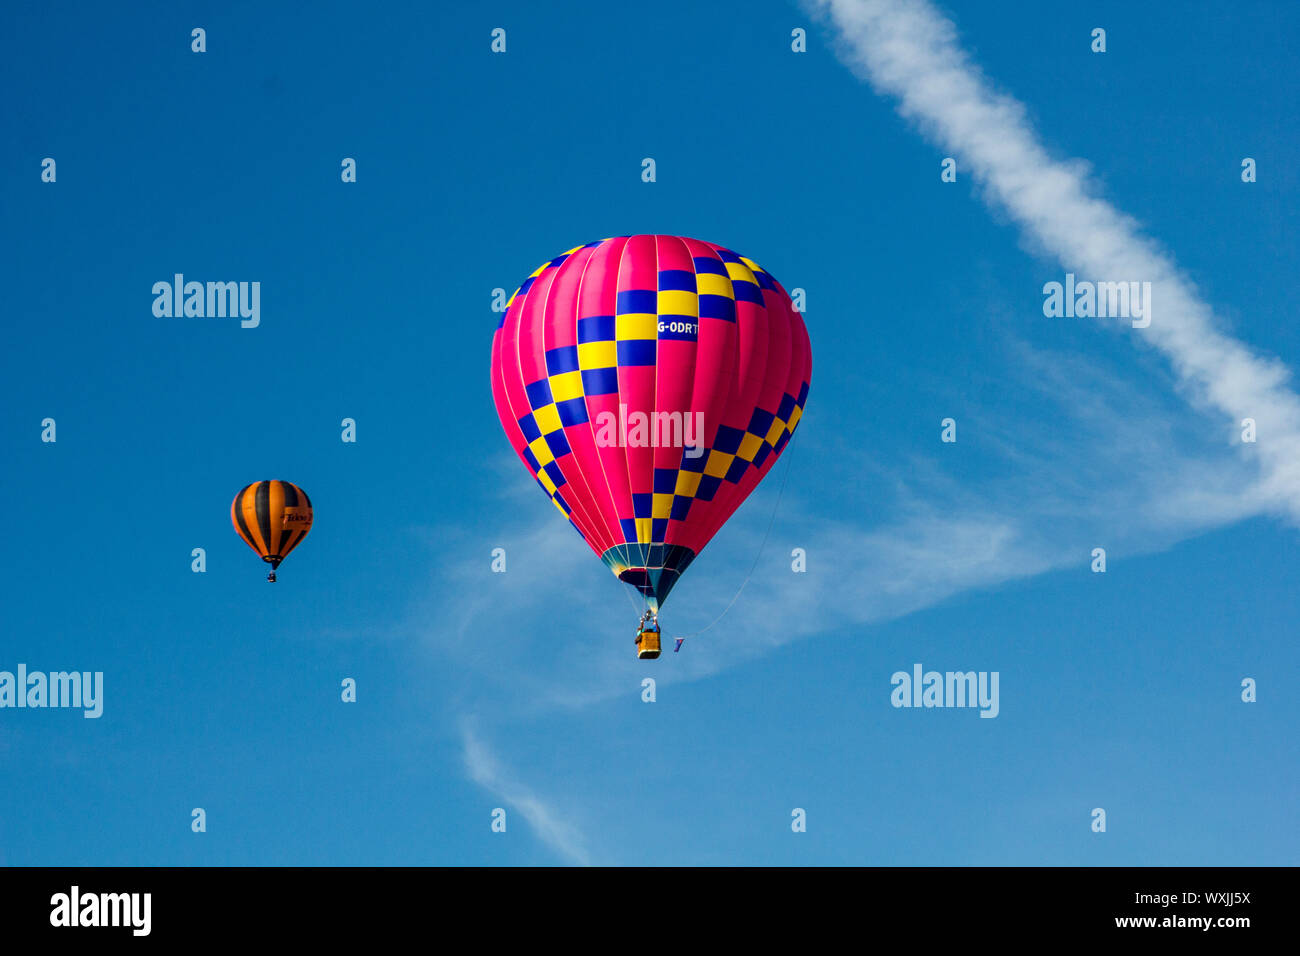 A perfect hot pink with a yellow stripe hot air balloon, flying against a blue sky and a swish of a cloud. Another balloon in the distant background. Stock Photo